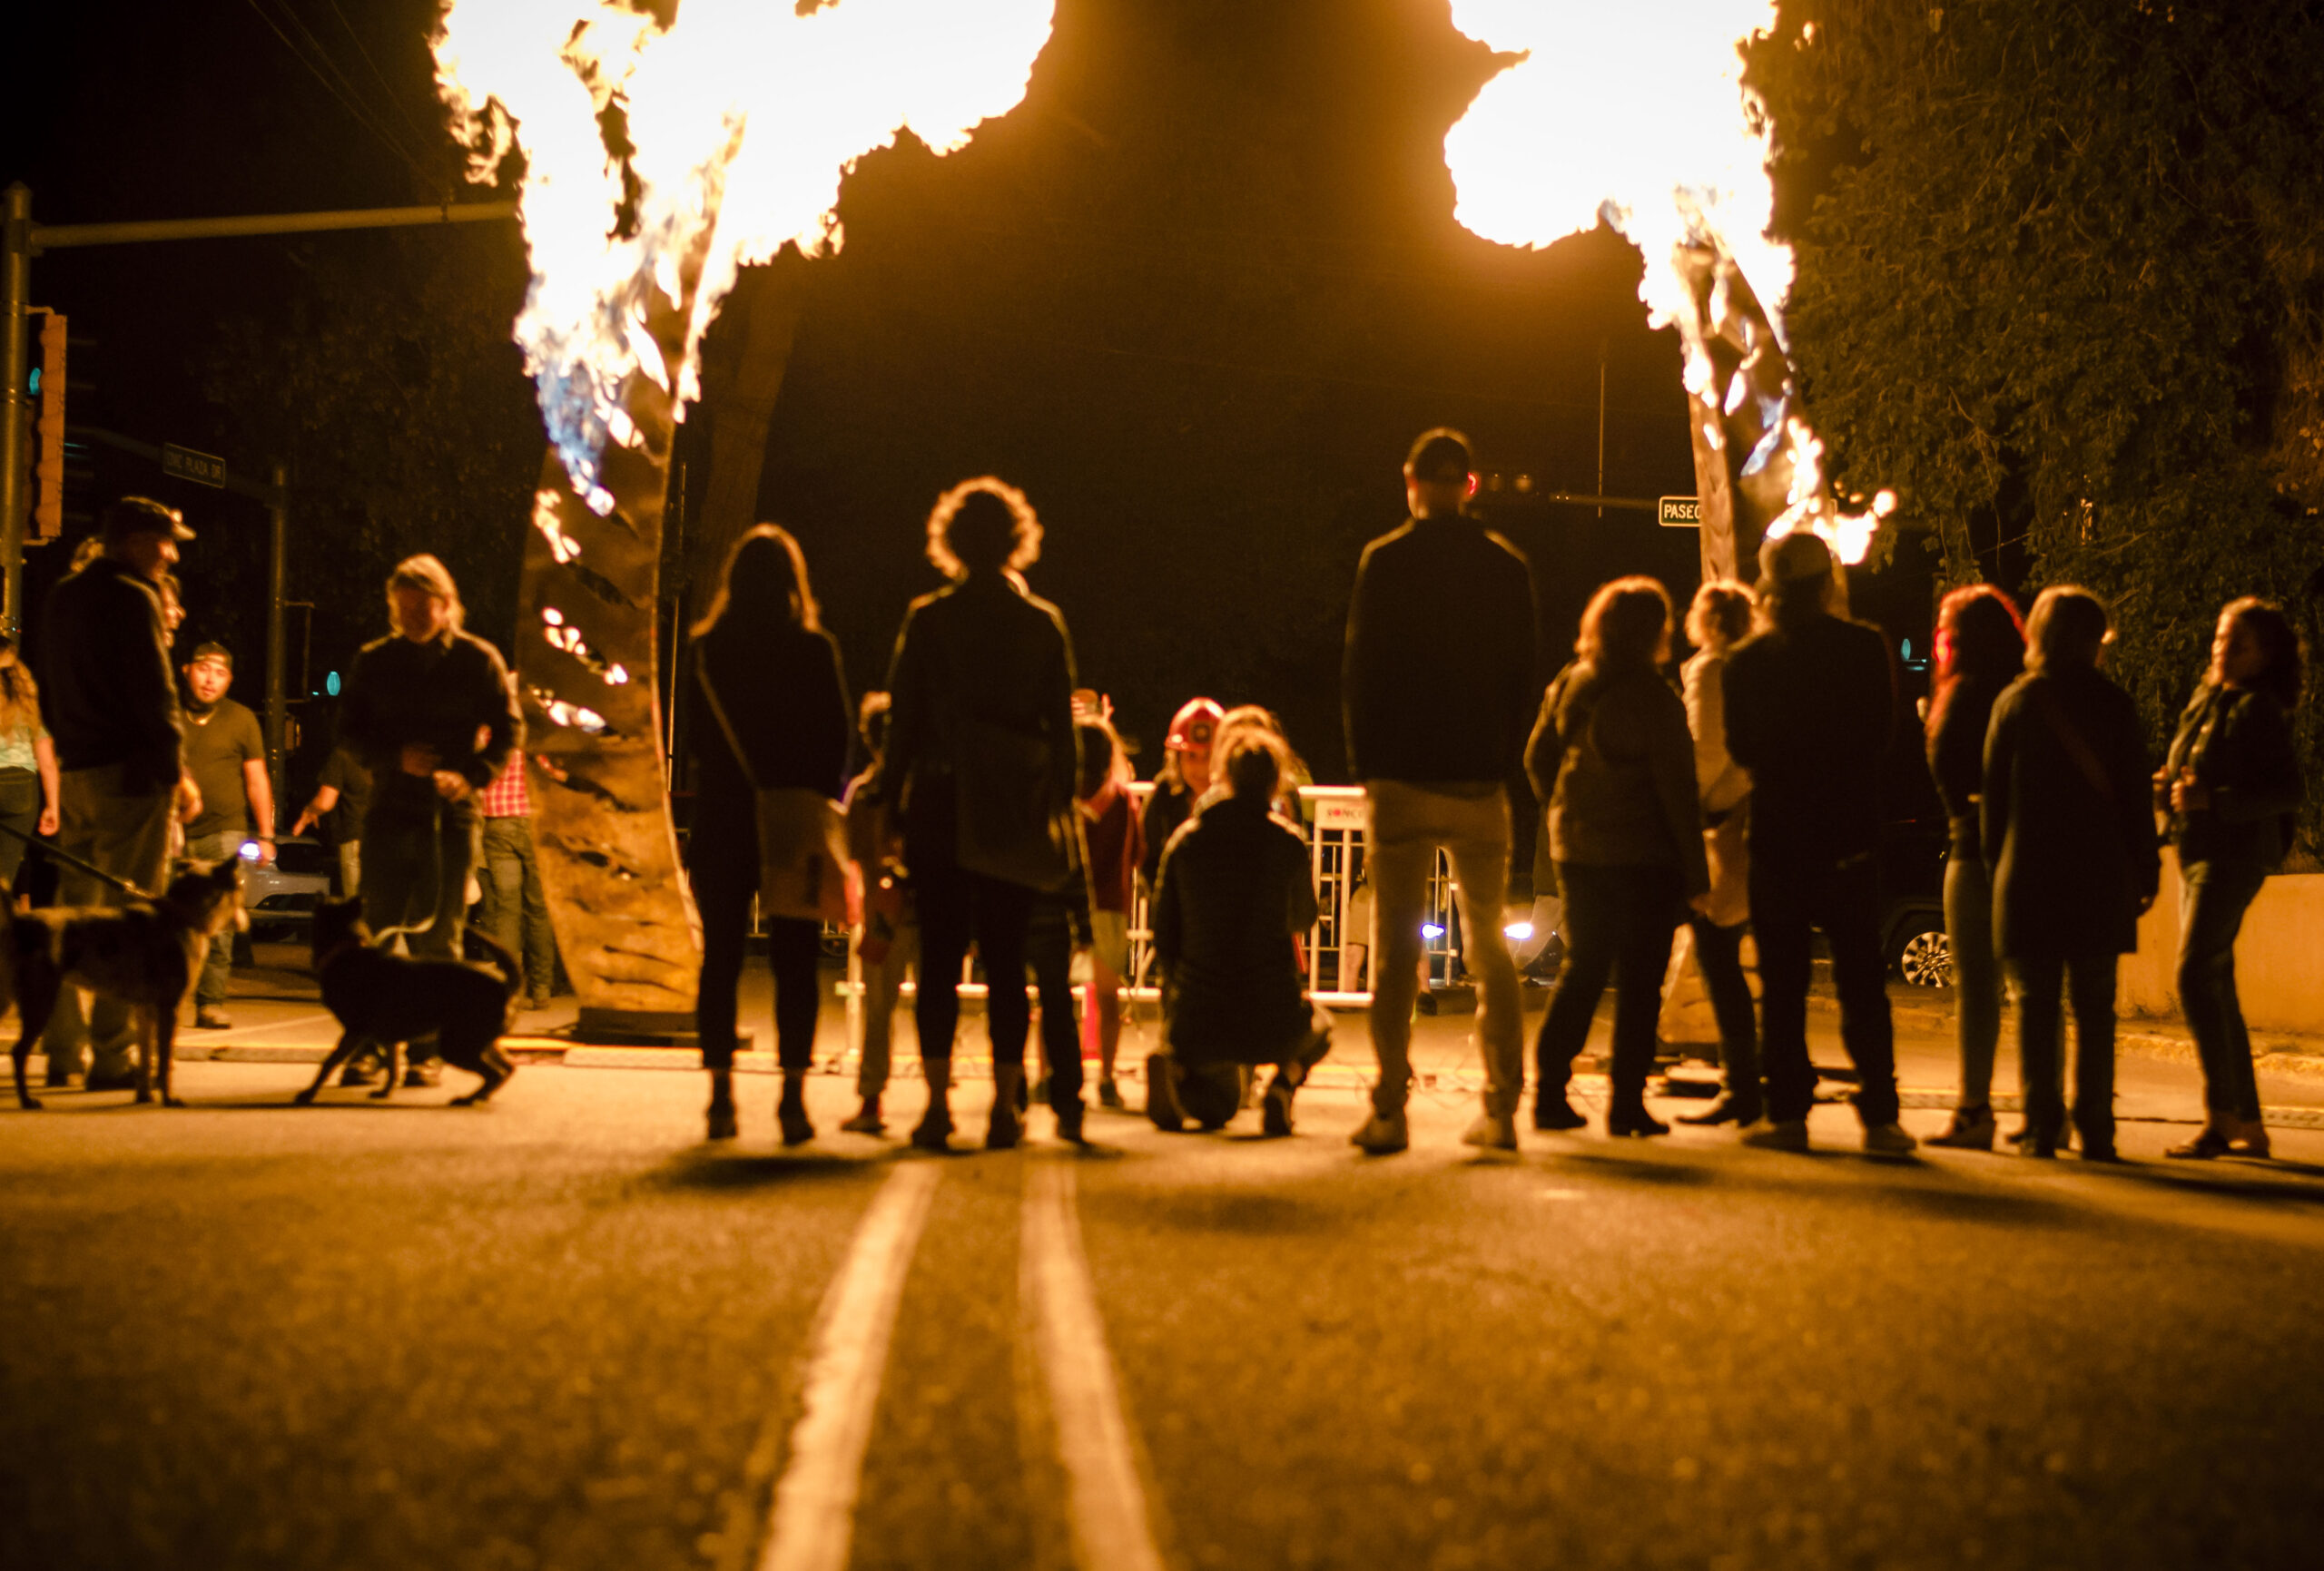 An image of a bunch of people outside looking at fire sculptures.